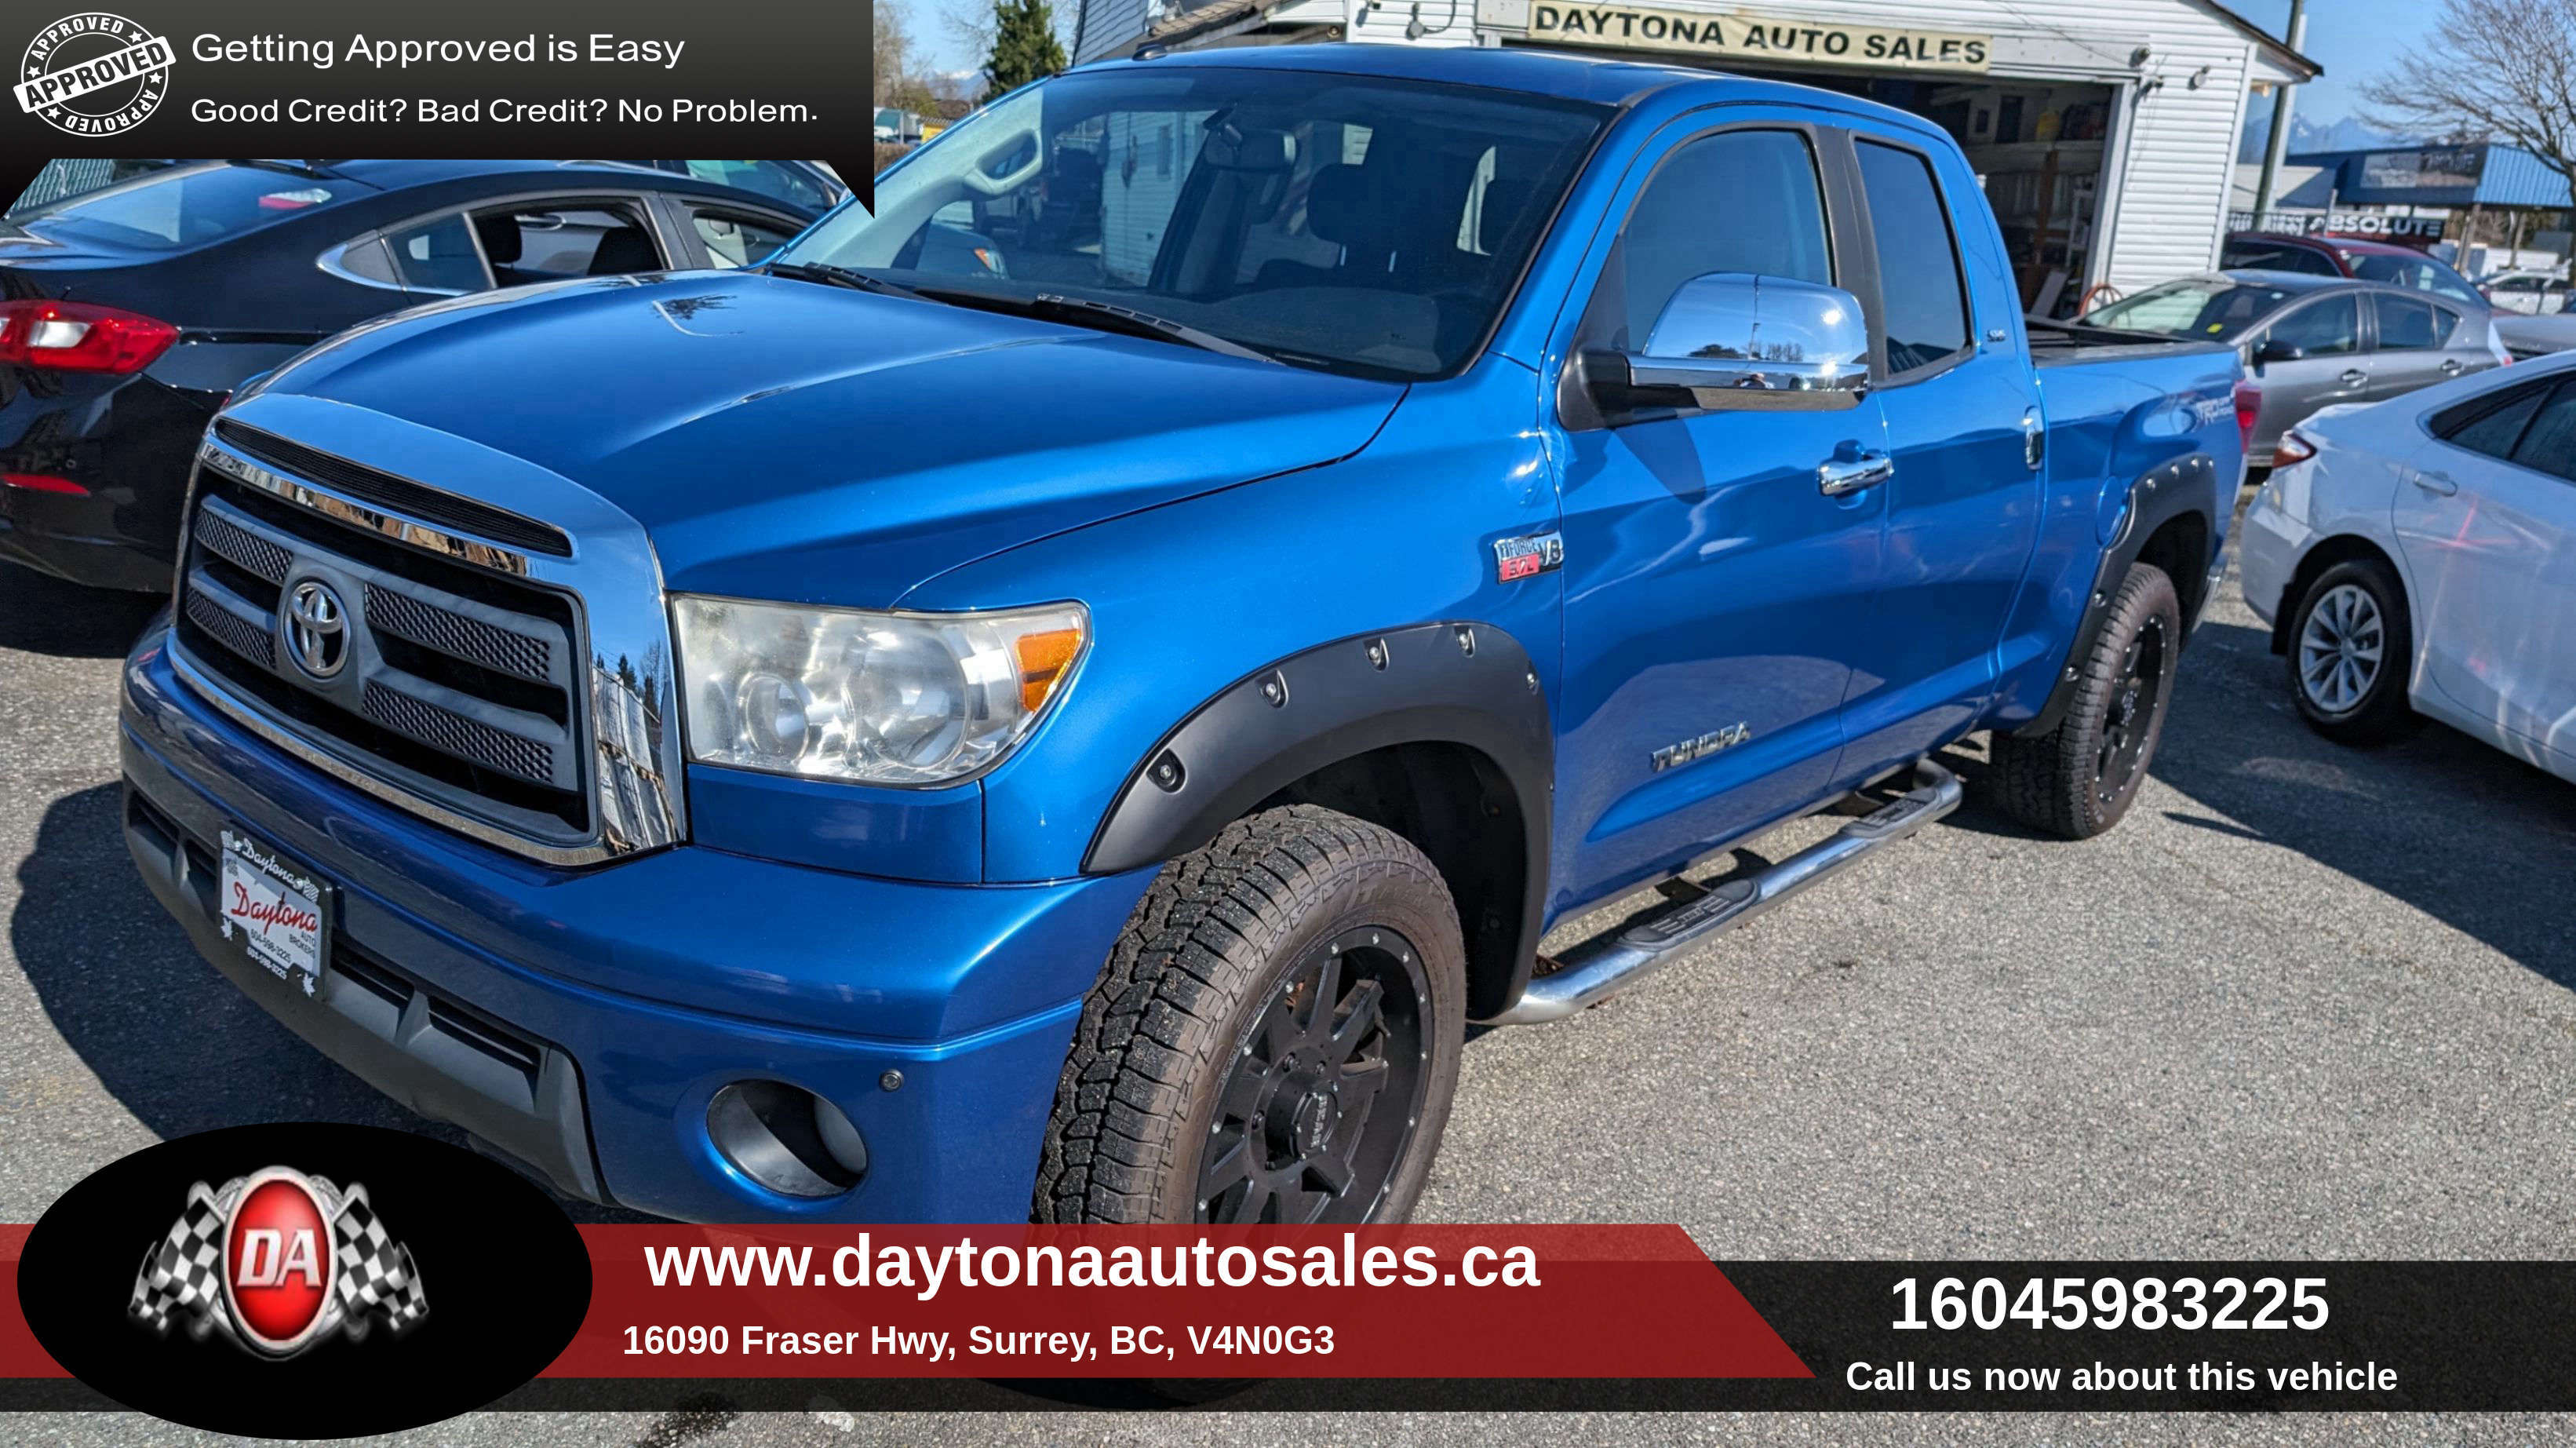 2010 Toyota Tundra 4WD Double Cab 146  5.7L SR5, TRD Offroad, 